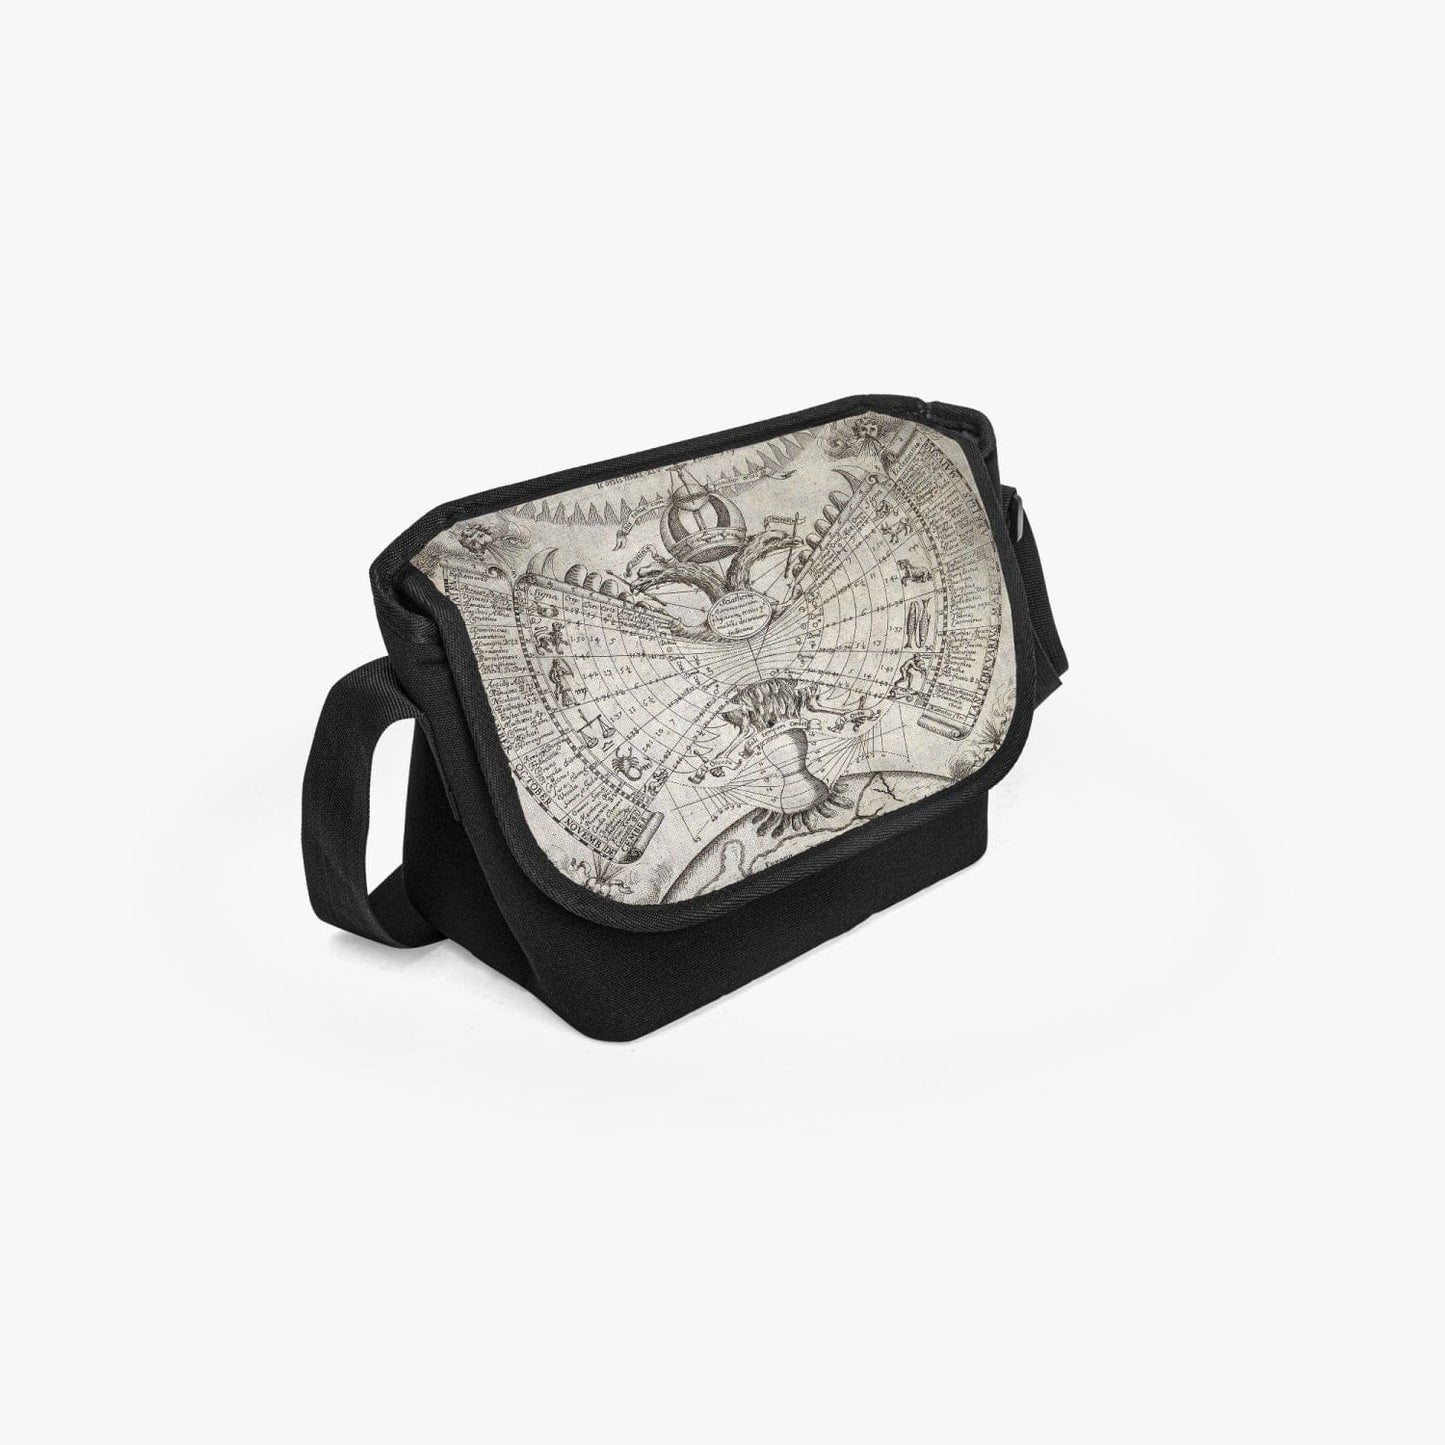 Engraving by P. Miotte dated 1646 is the source of the print on this practical, unisex Messenger bag at Gallery Serpentine 1